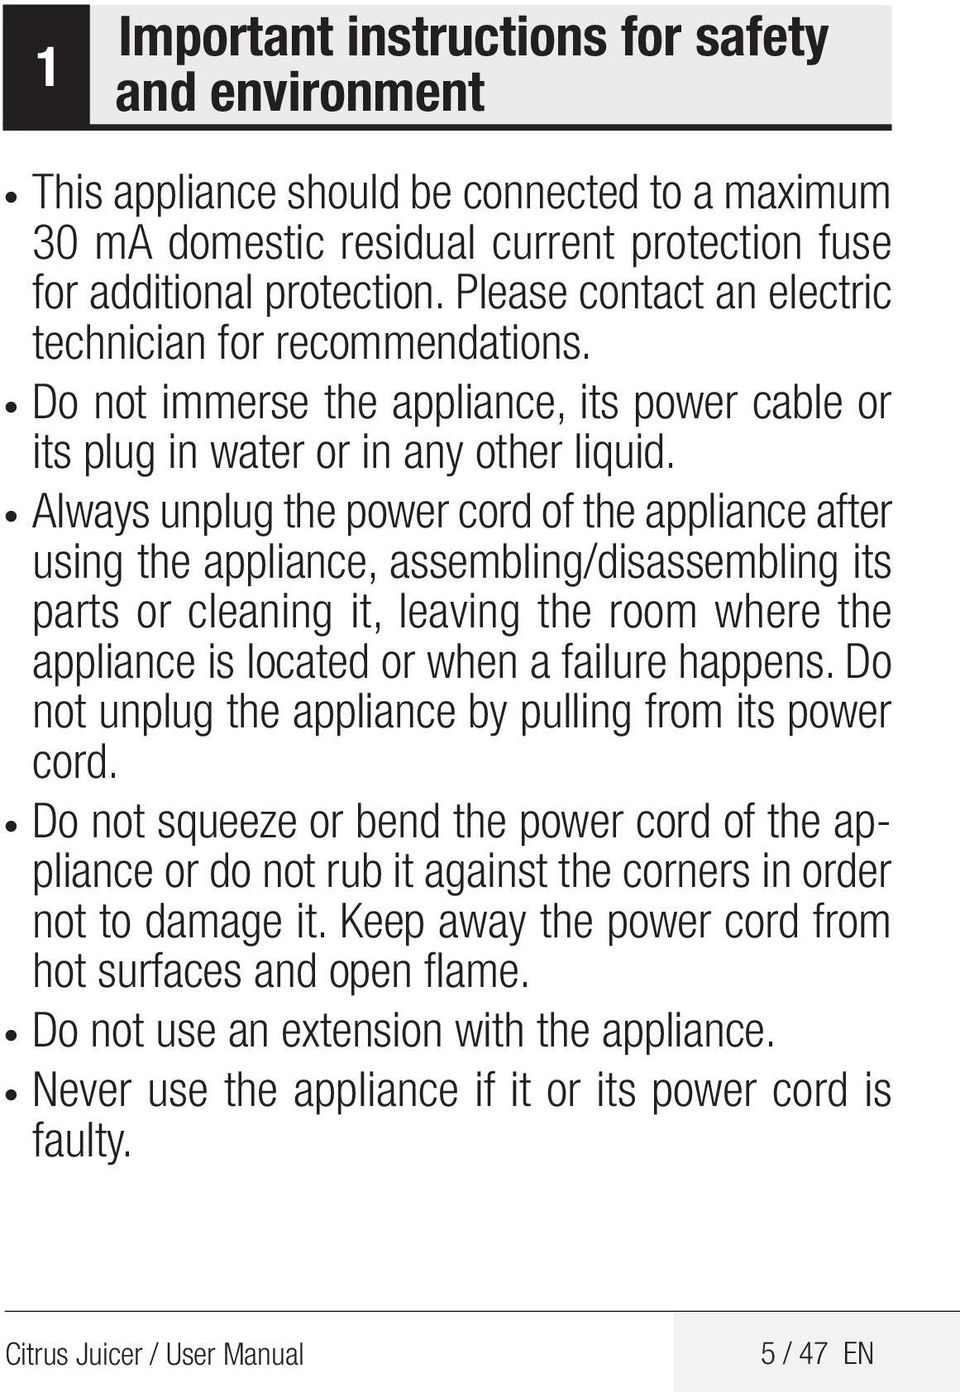 Always unplug the power cord of the appliance after using the appliance, assembling/disassembling its parts or cleaning it, leaving the room where the appliance is located or when a failure happens.